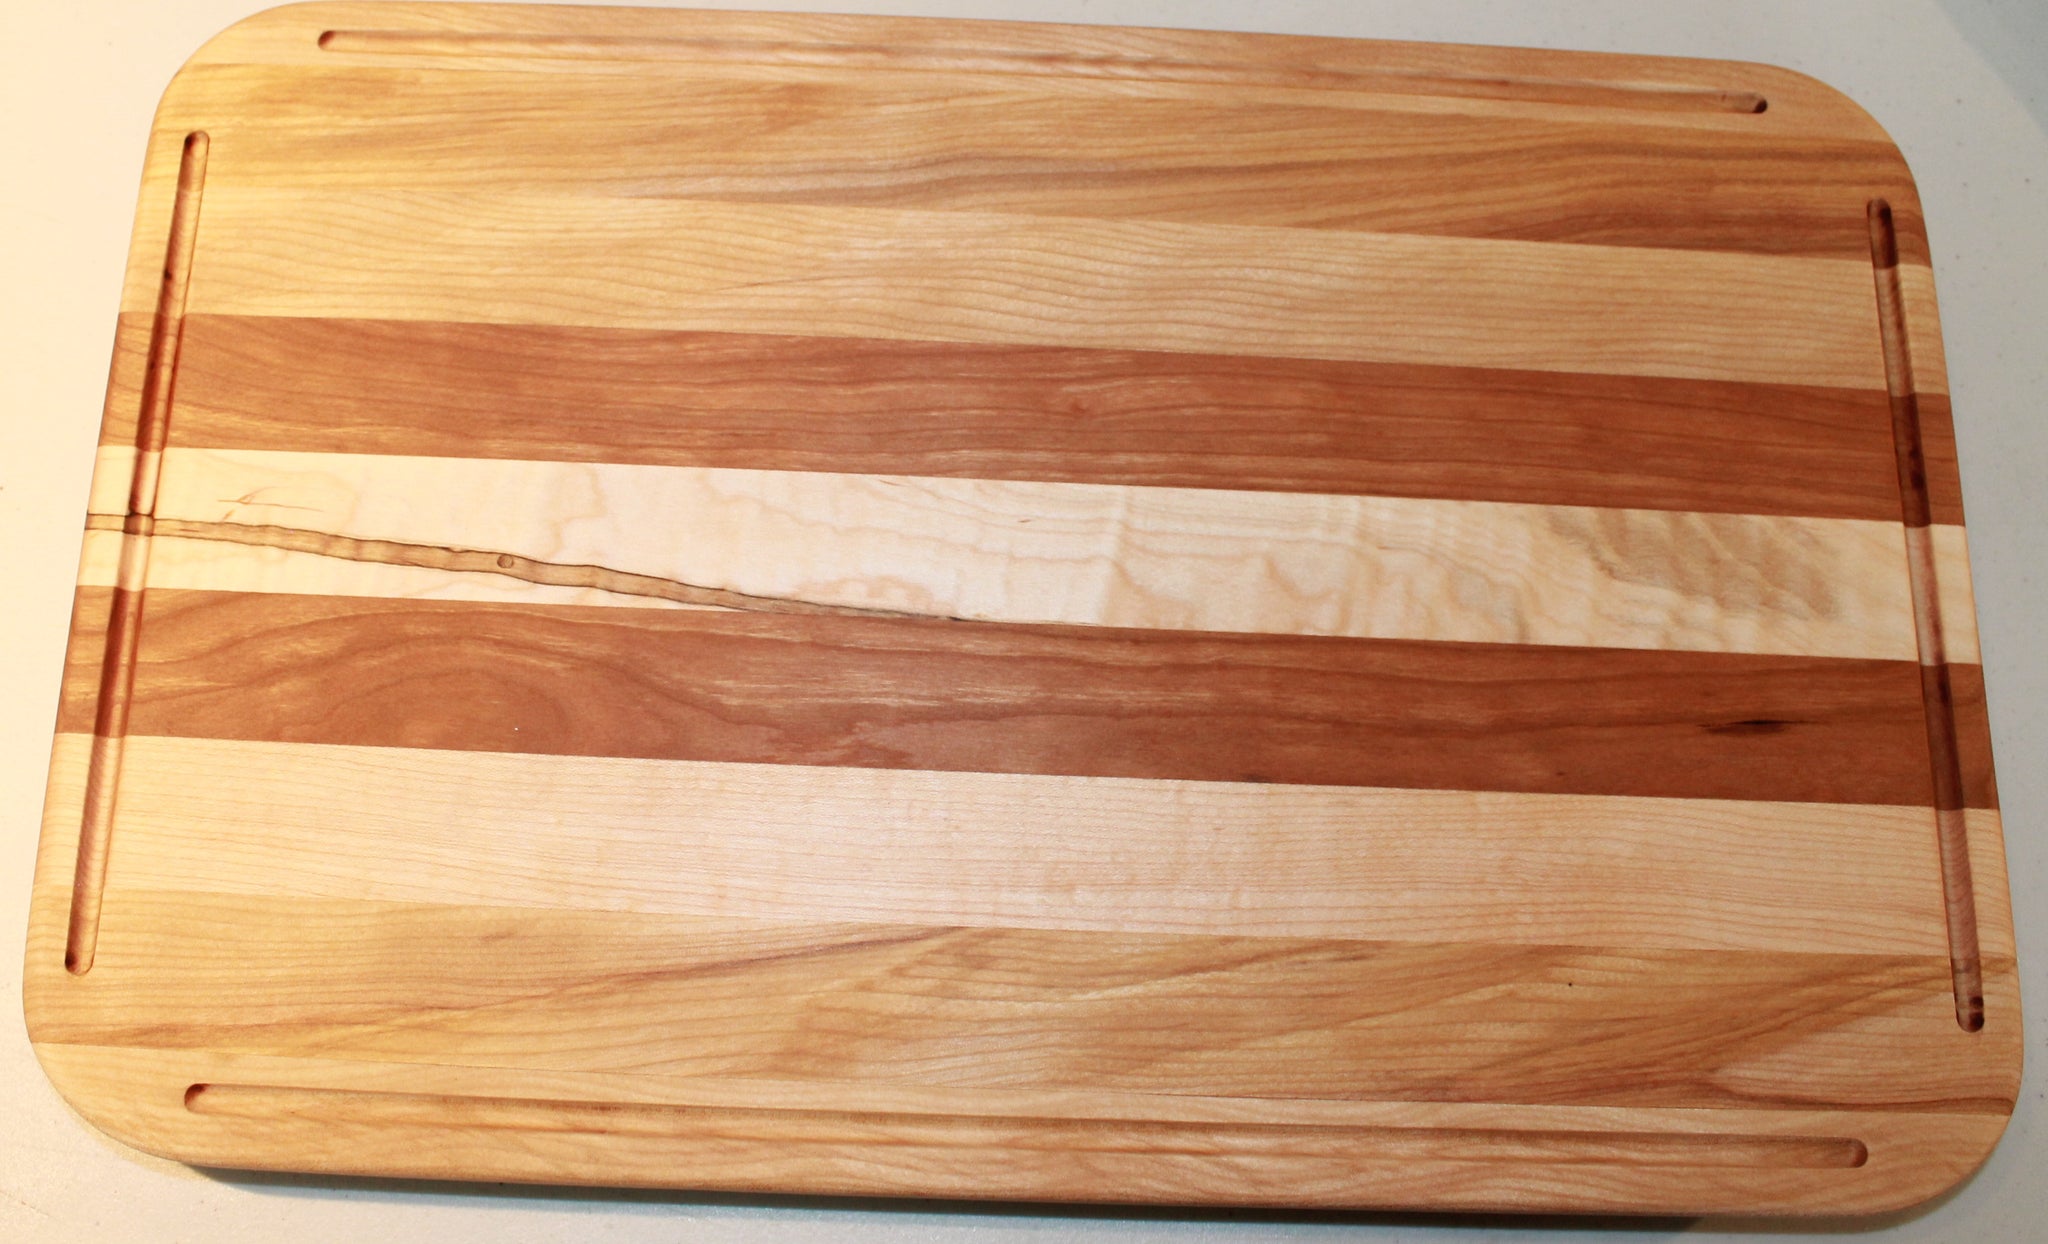 Square cutting board with rounded edges; light wood.